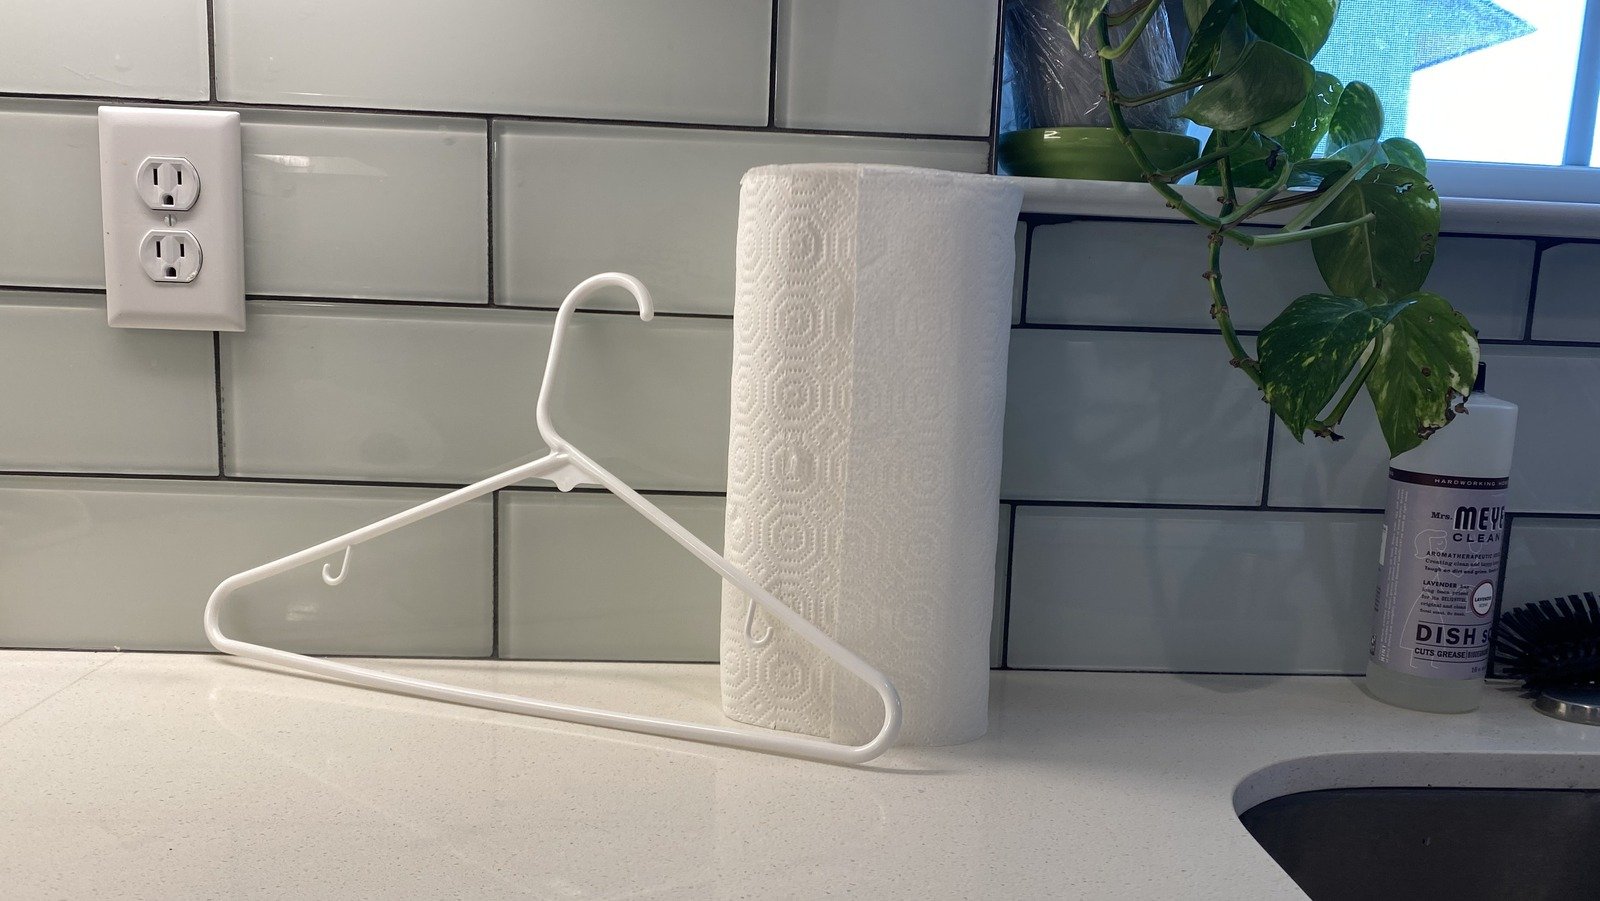 We Tried The Coat Hanger As A Paper Towel Holder Hack And We Can Roll With These Two Perks